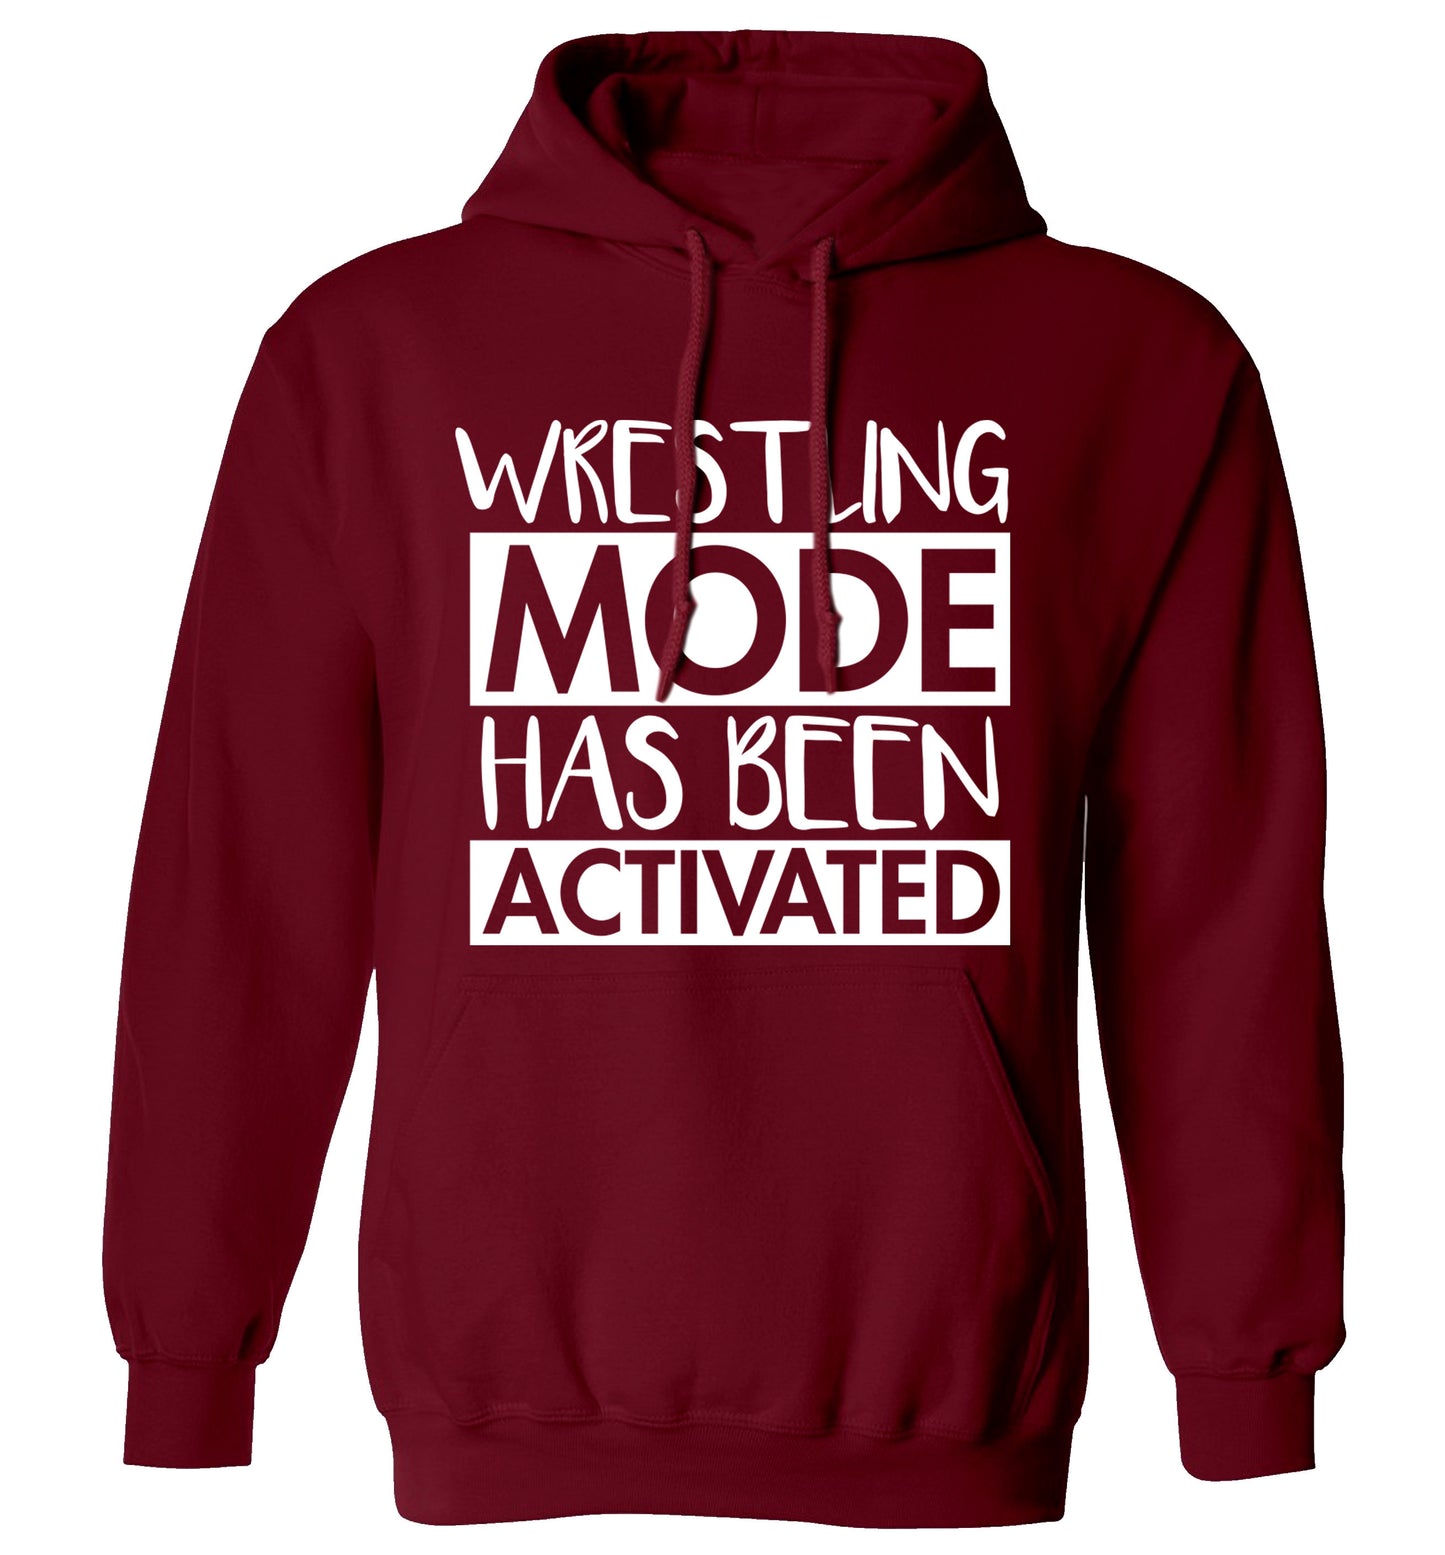 Wresting mode activated adults unisex maroon hoodie 2XL